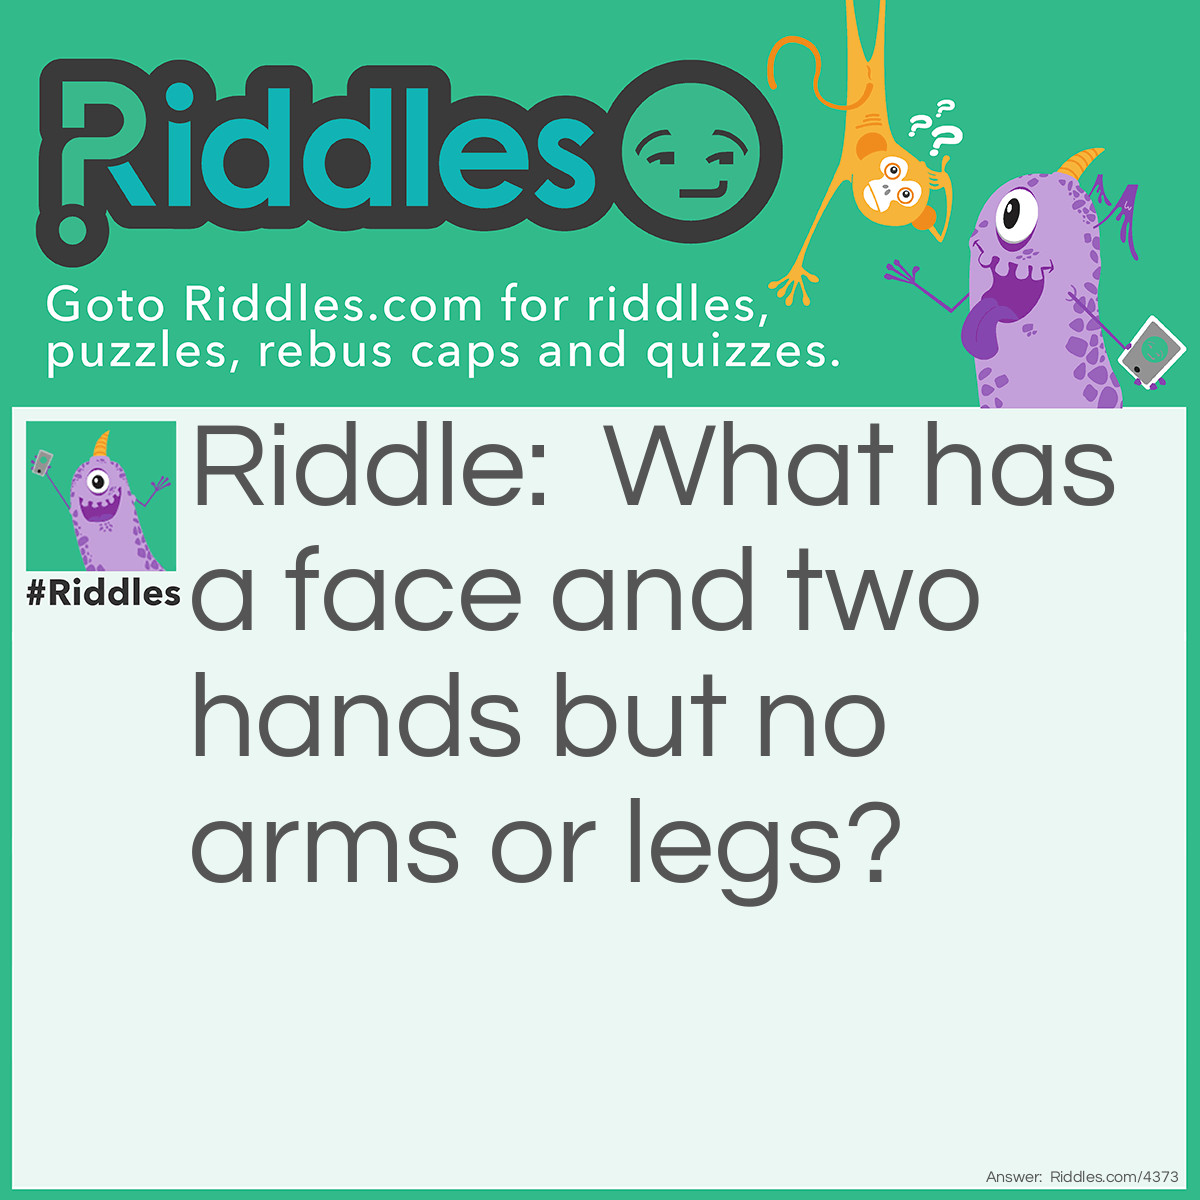 Riddle: What has a face and two hands but no arms or legs? Answer: A clock!